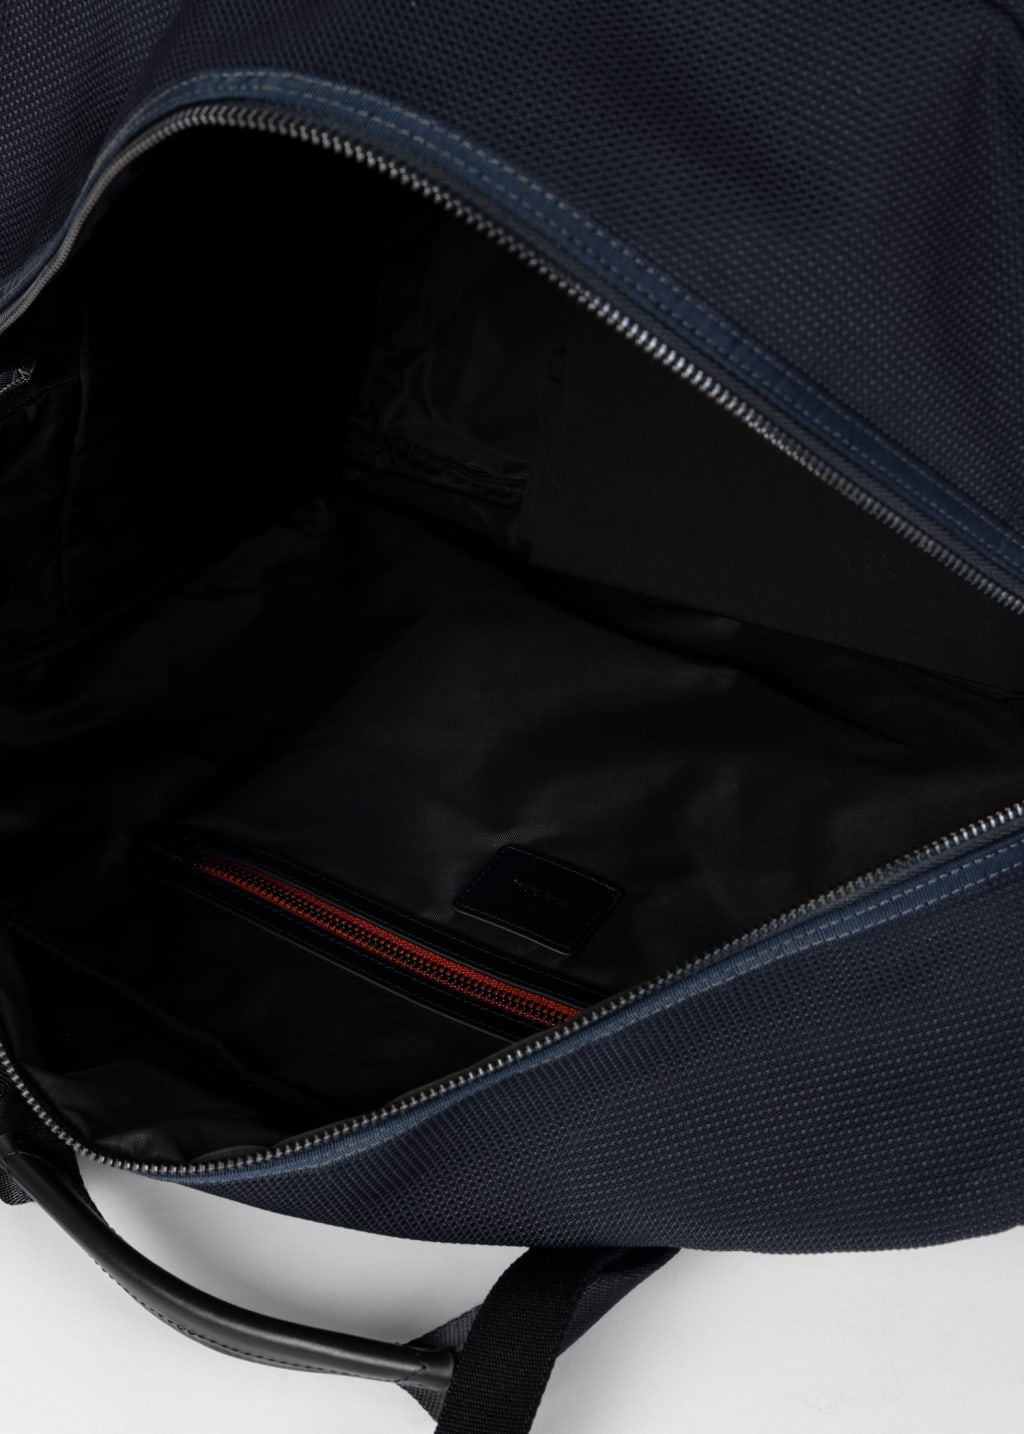 Detail View - Canvas 'Signature Stripe' Holdall Paul Smith